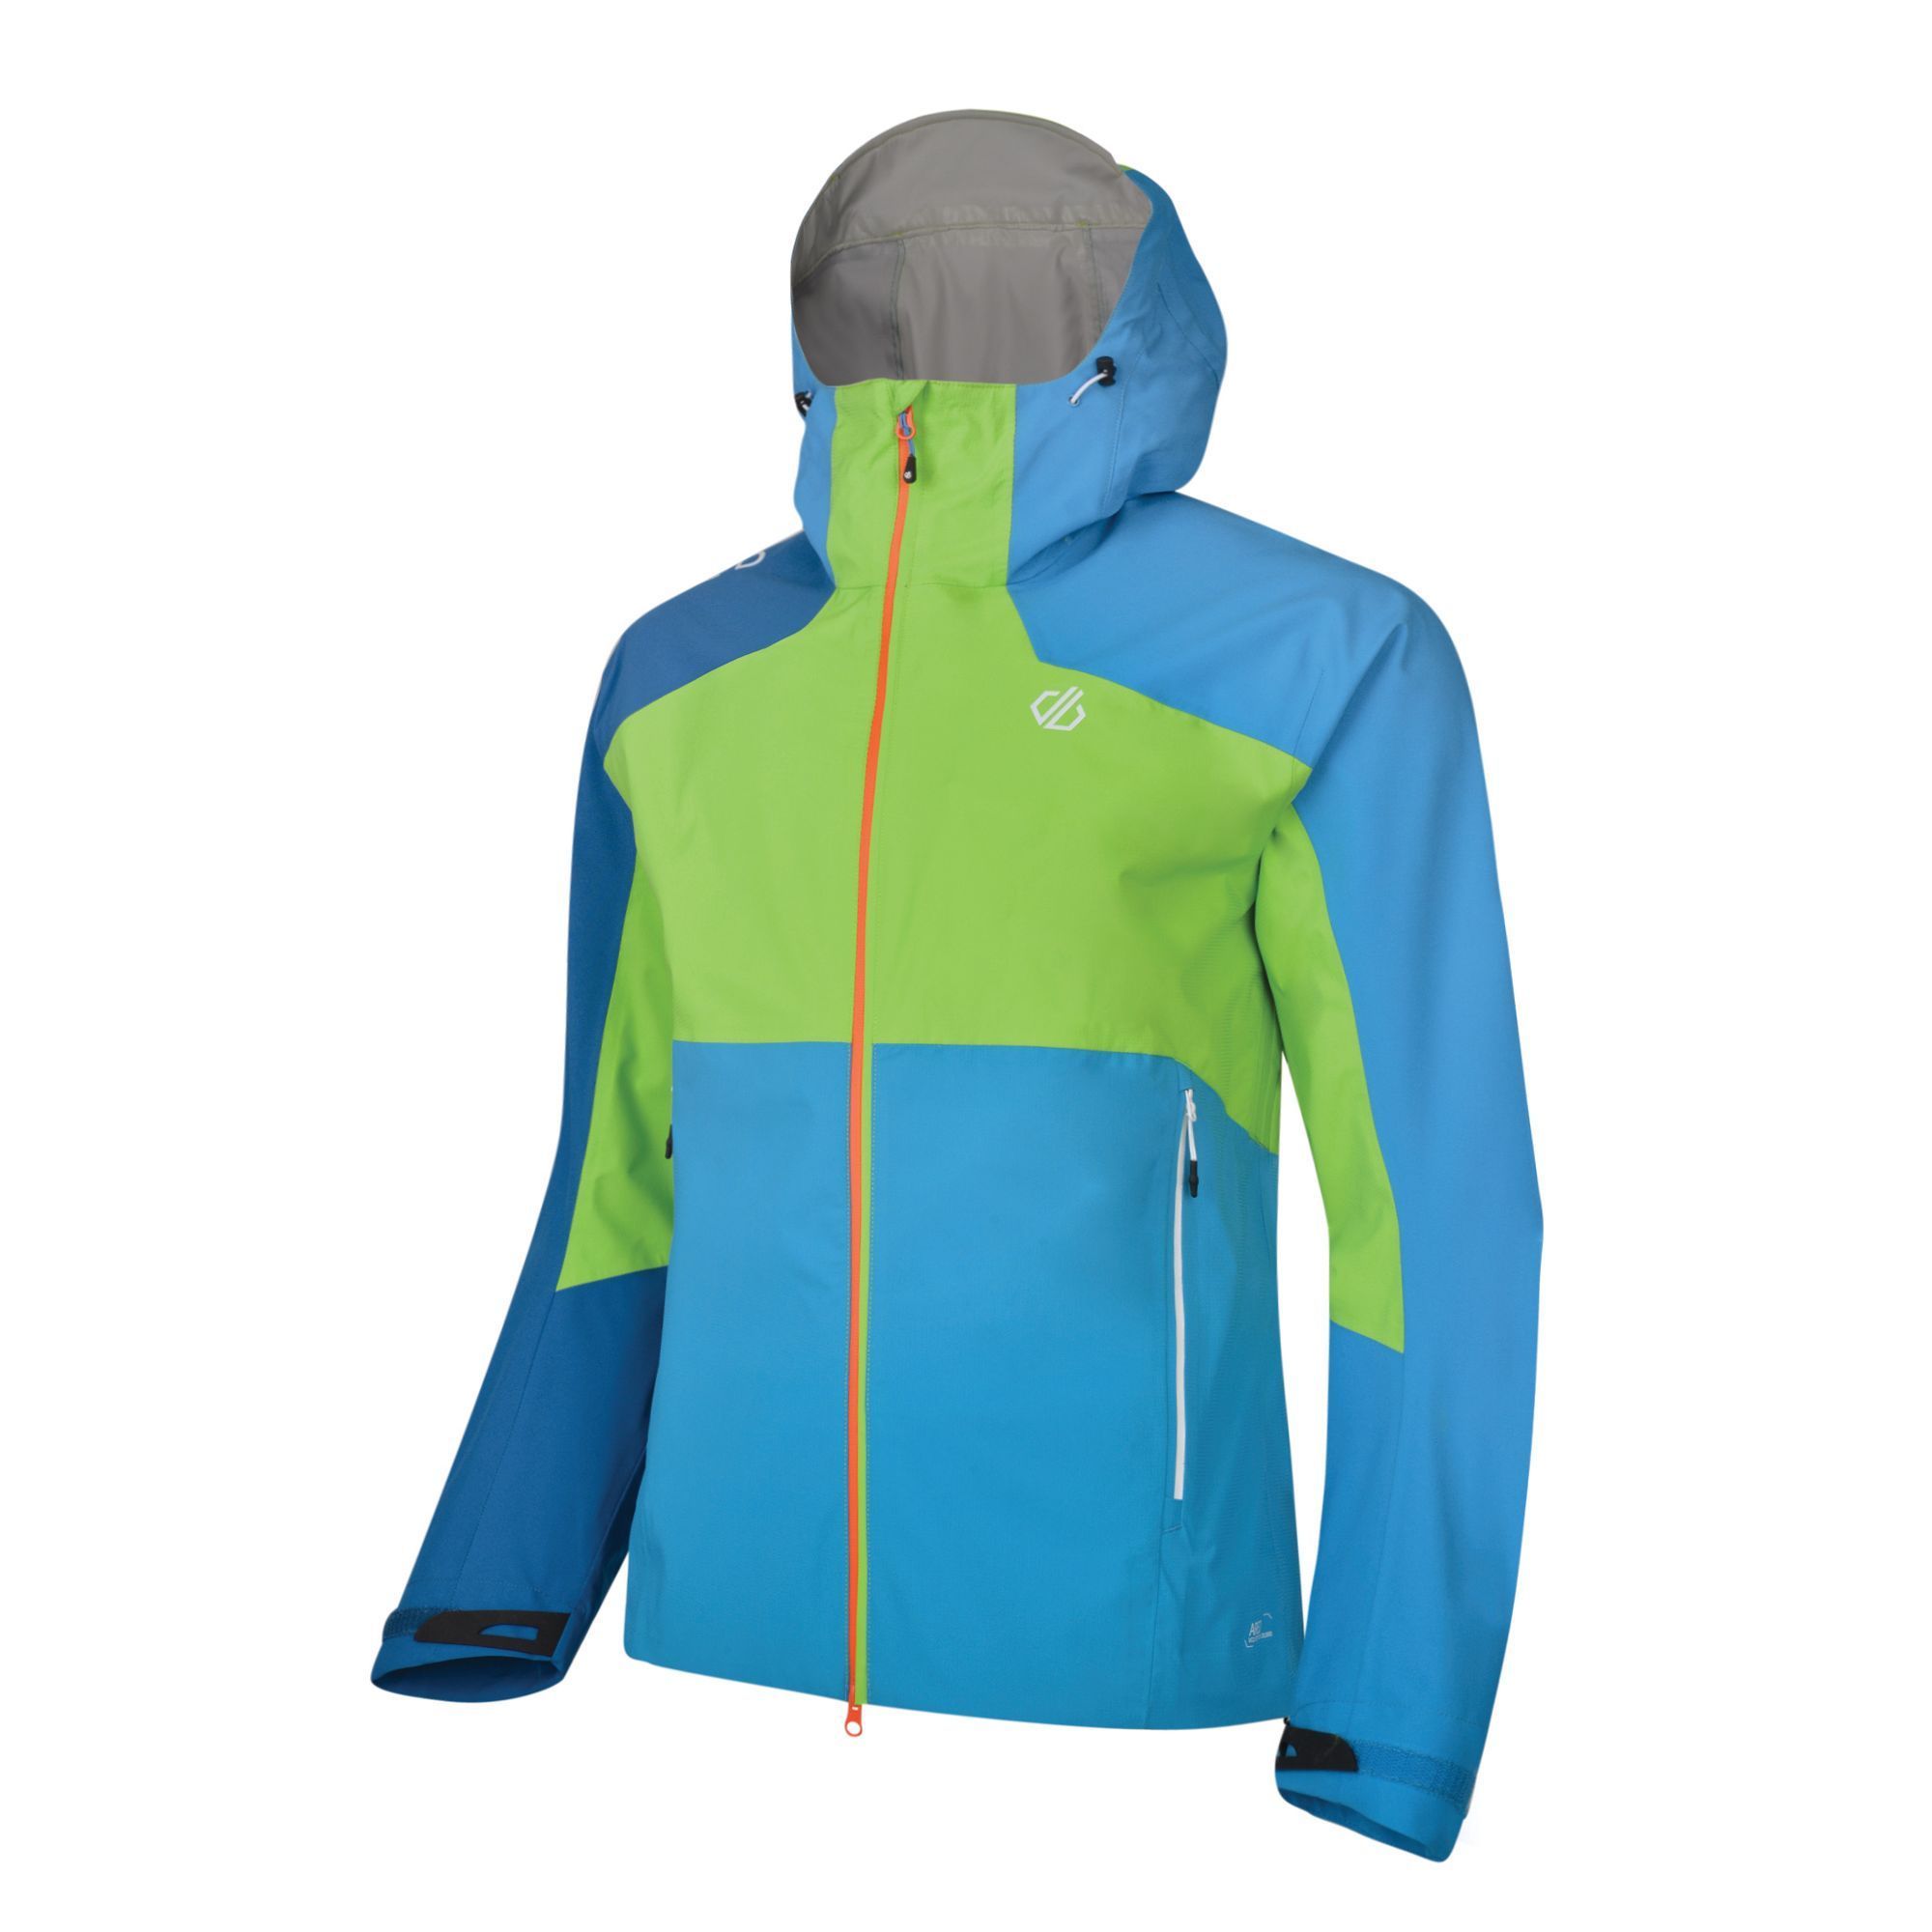 100% ared v02 20000 polyester ripstop. 2 layer stretch fabric. Breathability rating 10,000/m2/24hrs. Durable waterproof finish. Taped seams. Grown on technical wired peaked hood with high collar with adjusters. Underarm ventilation zips. Articulated sleeves for enhanced range of movement. Adjustable cuffs. 2 x longer length lower zipped pockets and 1 internal pocket. Adjustable shockcord hem system.